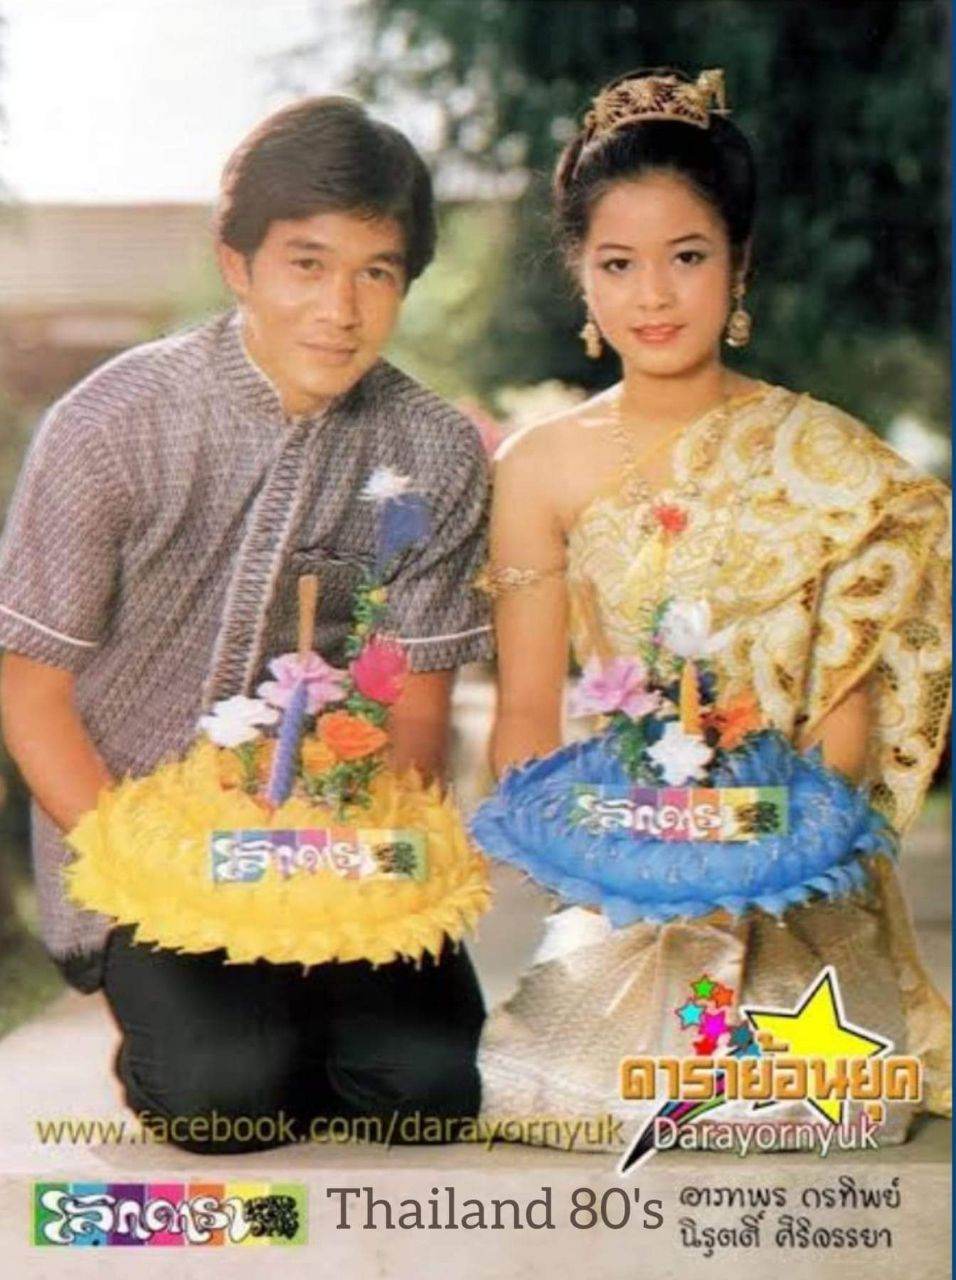 Loy Krathong festival from the old magazines 70's - 90's   #LoykrathongThailand